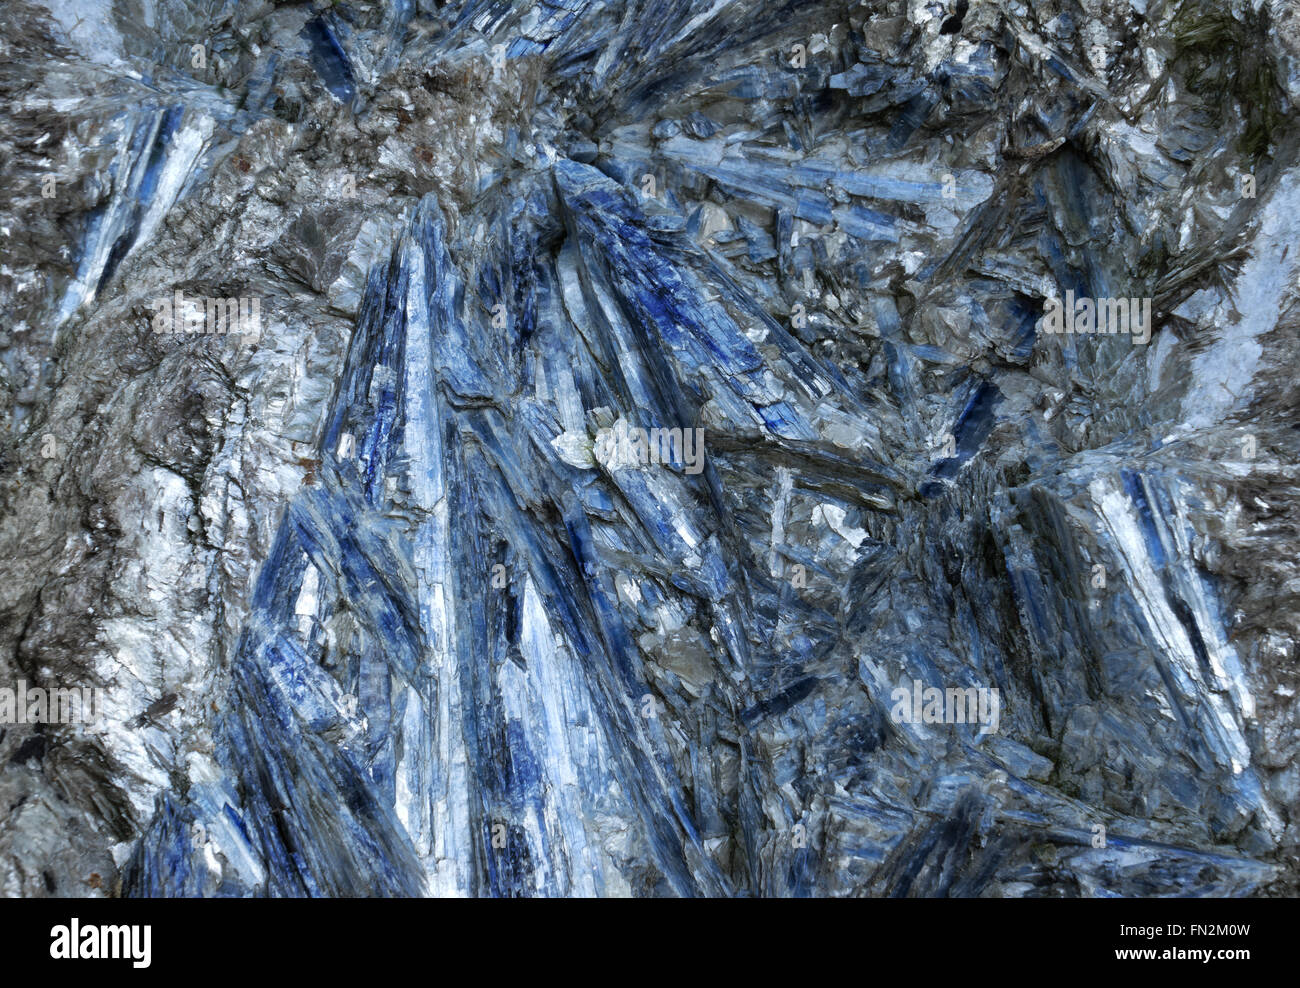 Abstract blue texture with rough surface in a gray silver stone. Taken in close-up. Stock Photo